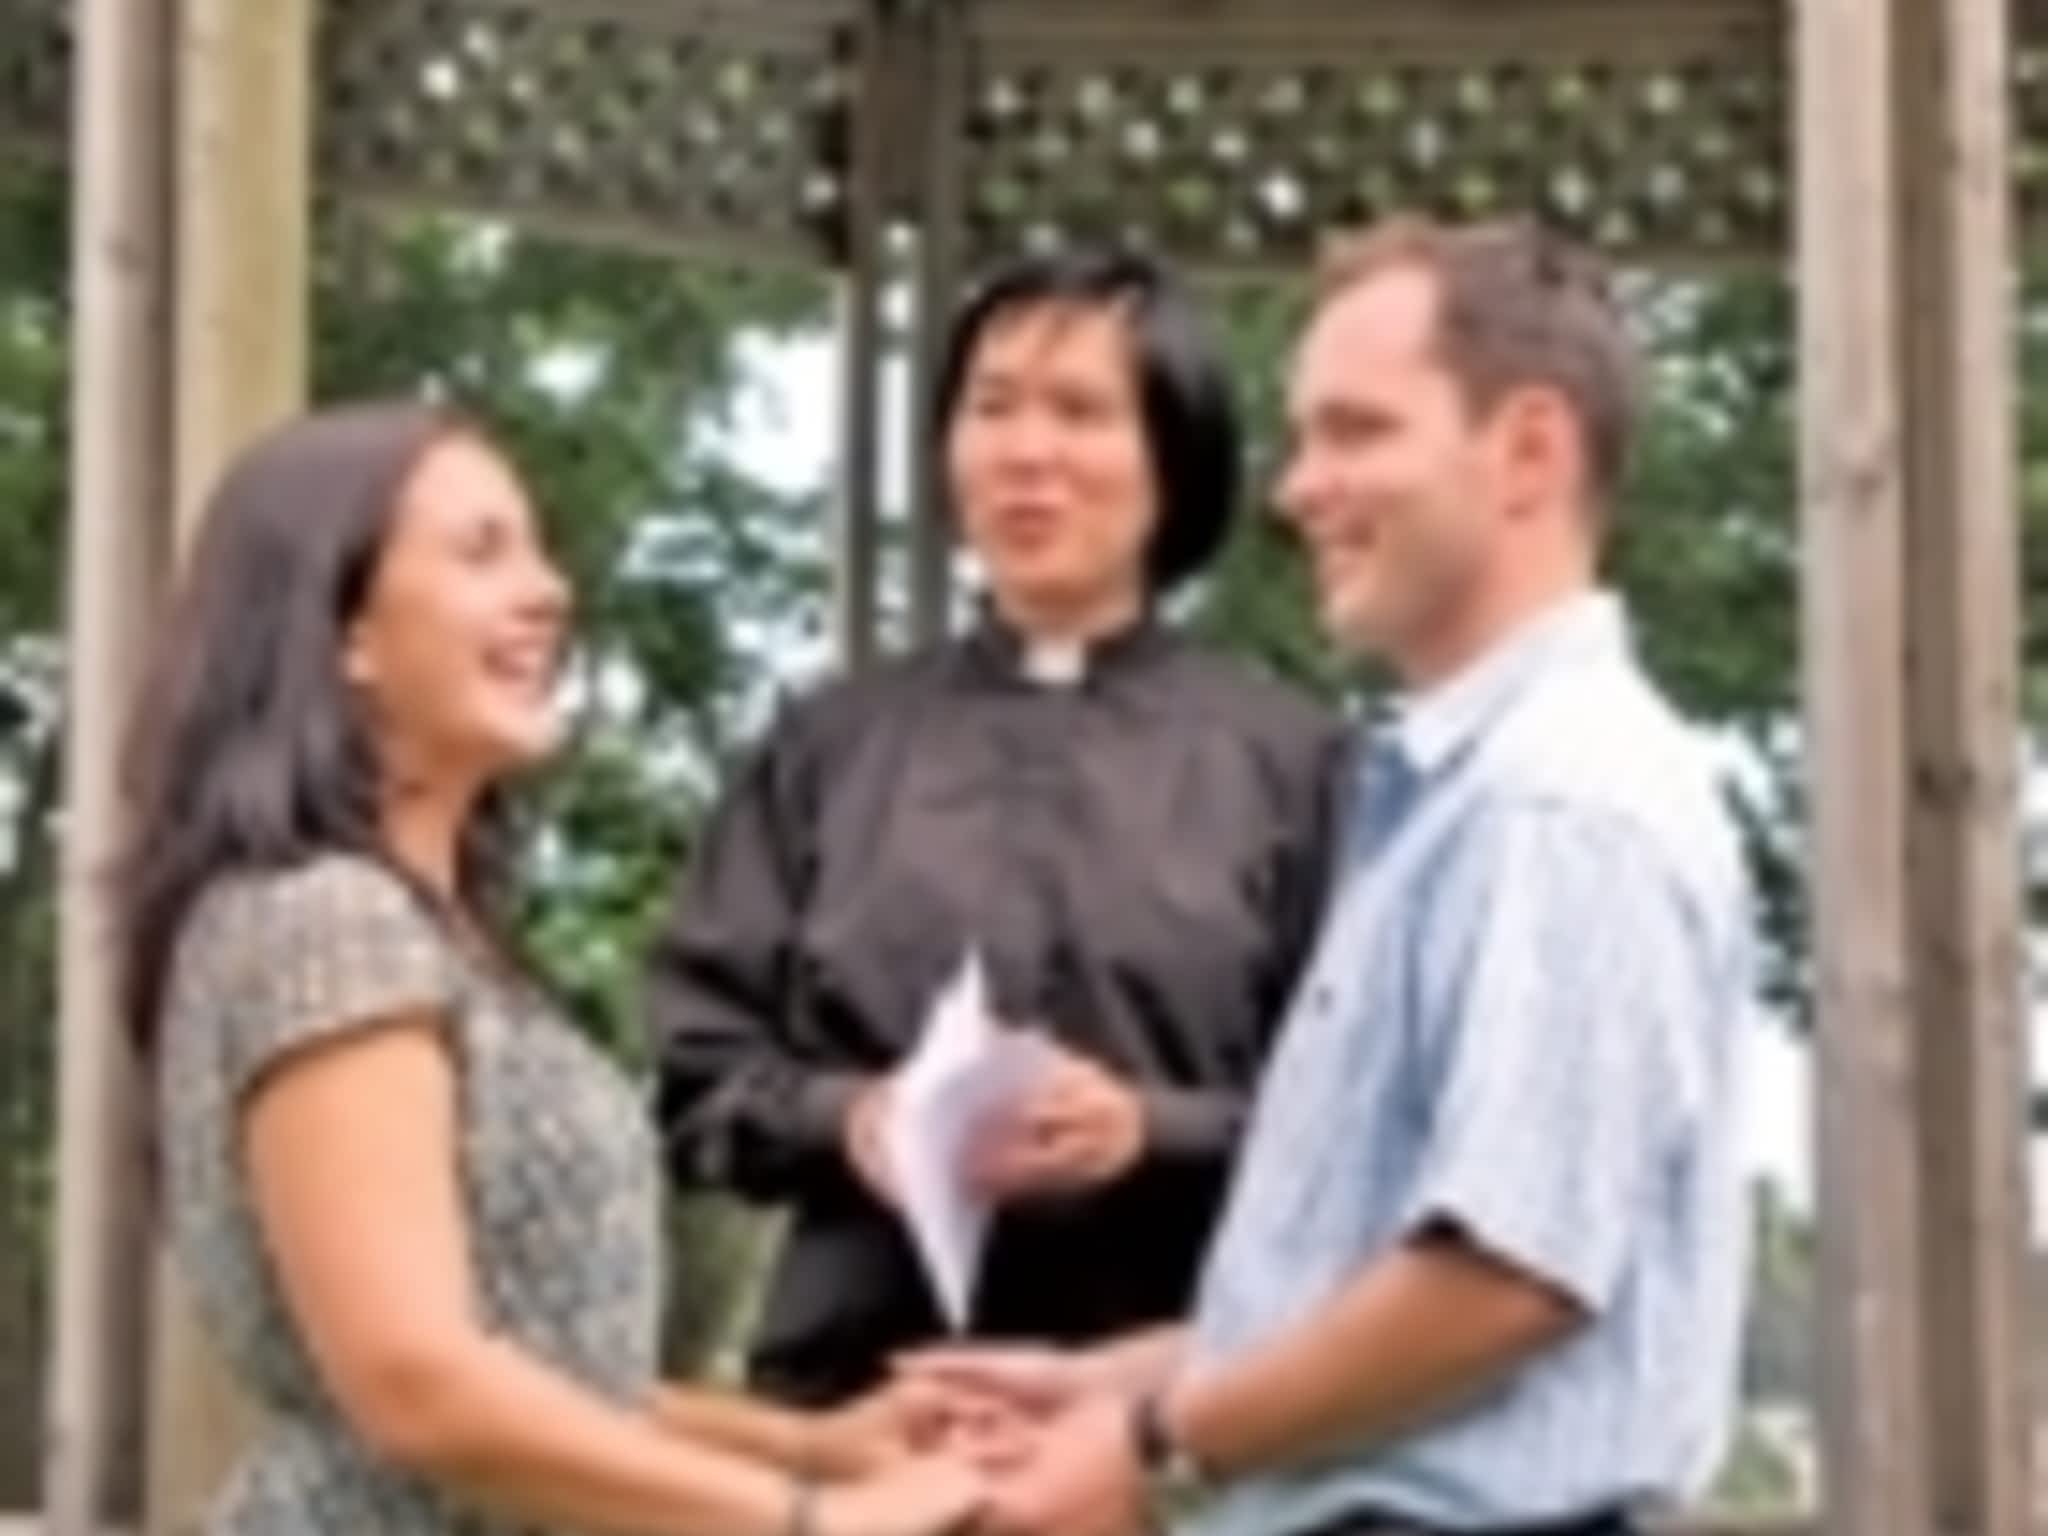 photo Halifax Wedding Chapel and Marriage Officiants